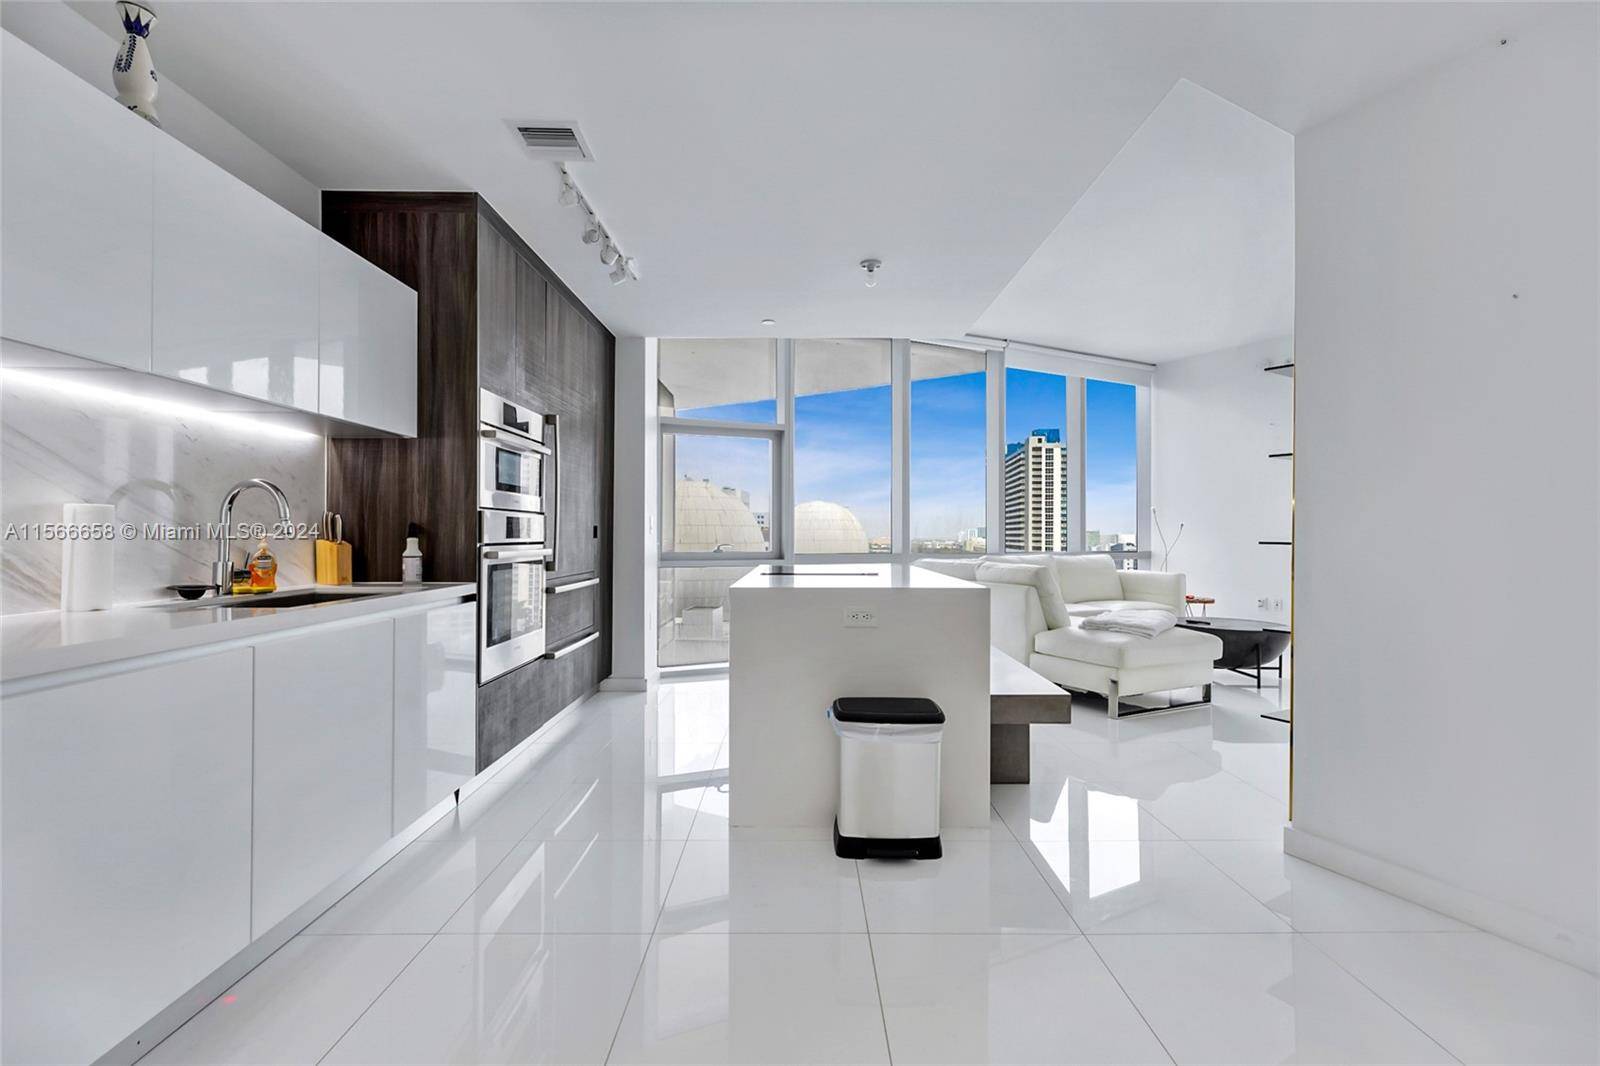 Perfect location In Hard Downtown Miami World Center HIGH CEILINGS 10' WITH A FLOOR TO CEILING WINDOWS ITALIAN KITCHEN AND TOP OF THE LINE APPLIANCES BOSH MARBLE FLOOR Most Amenities ...